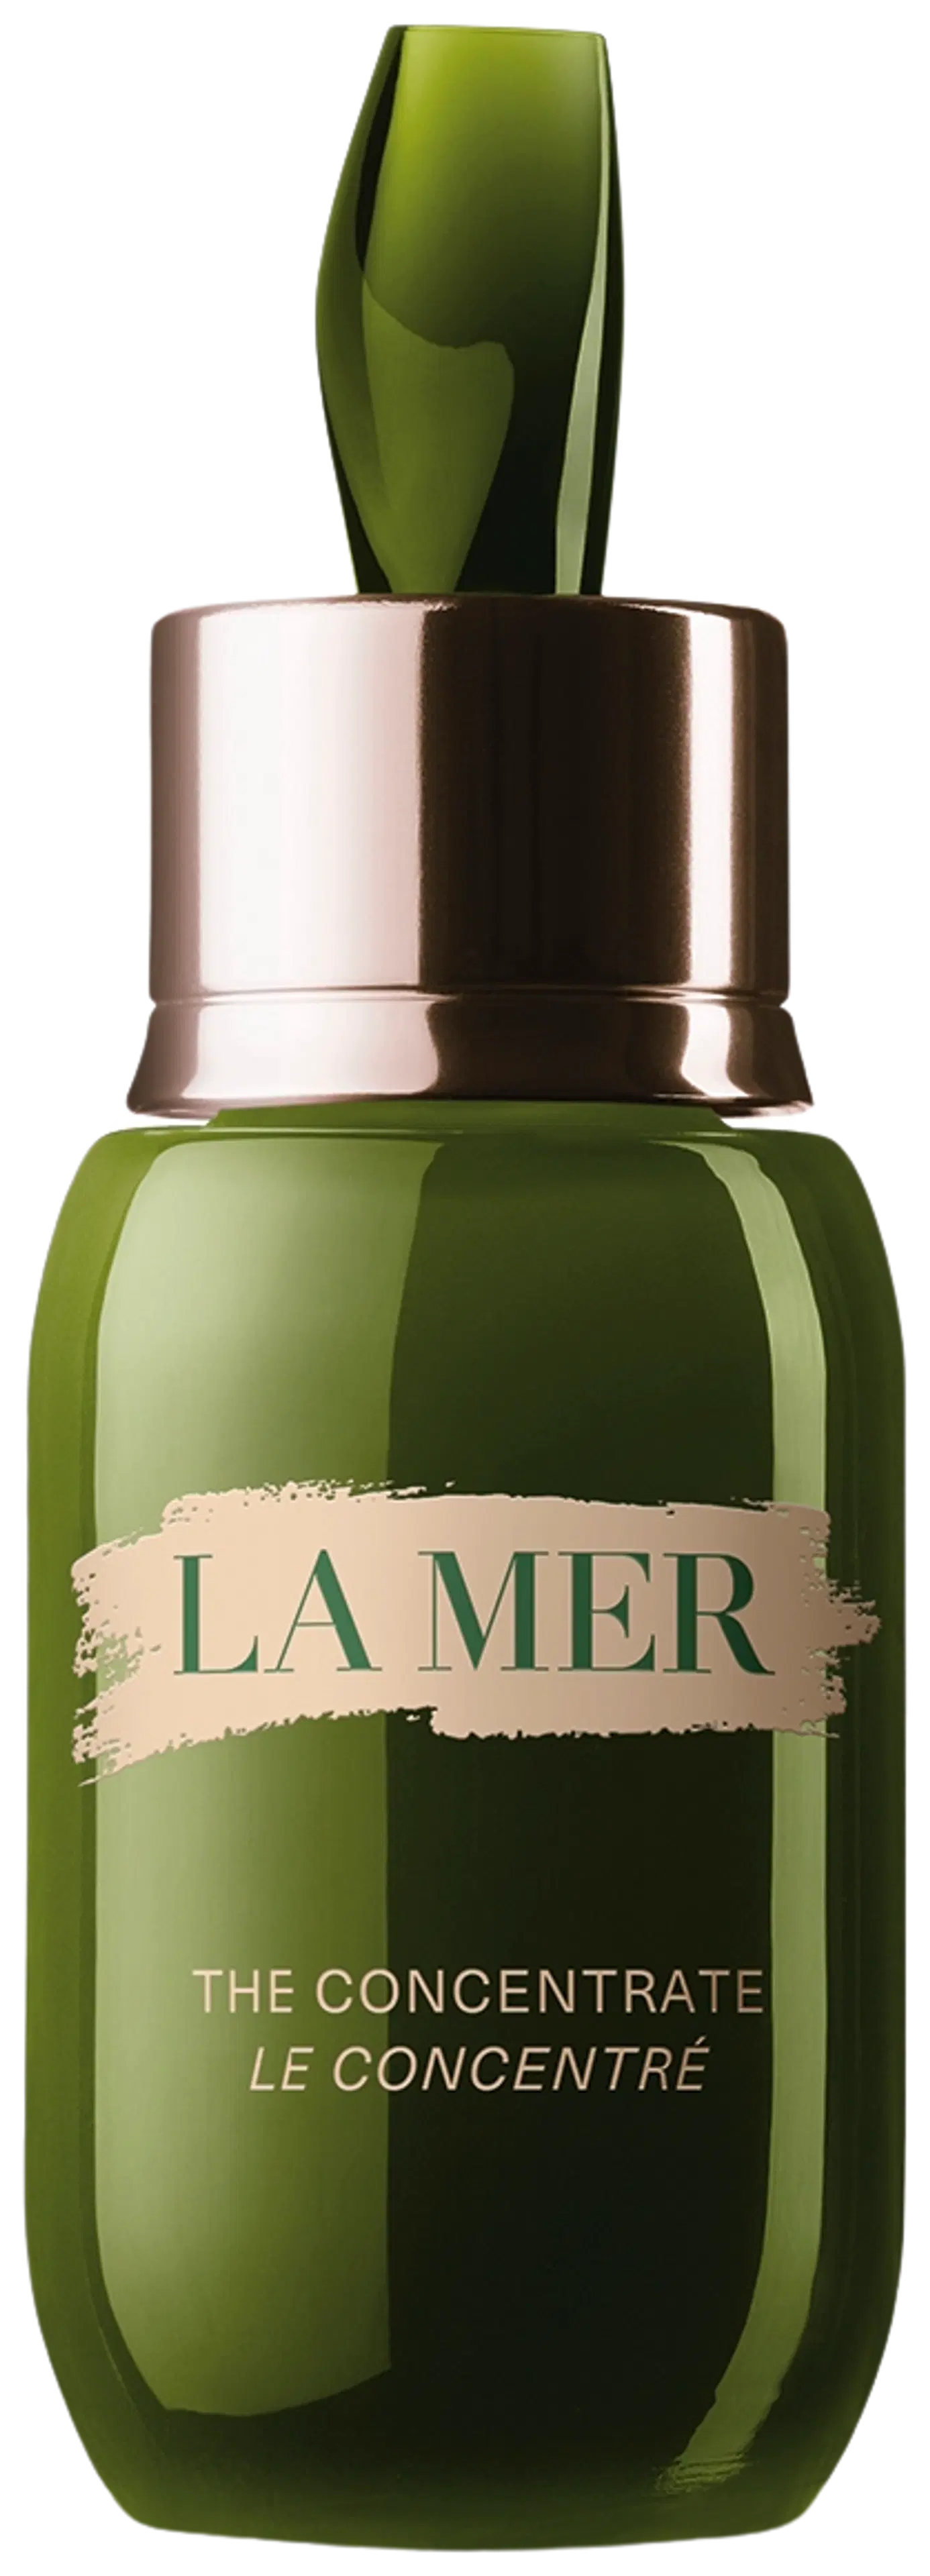 La Mer The Concentrate tehotiiviste 30 ml